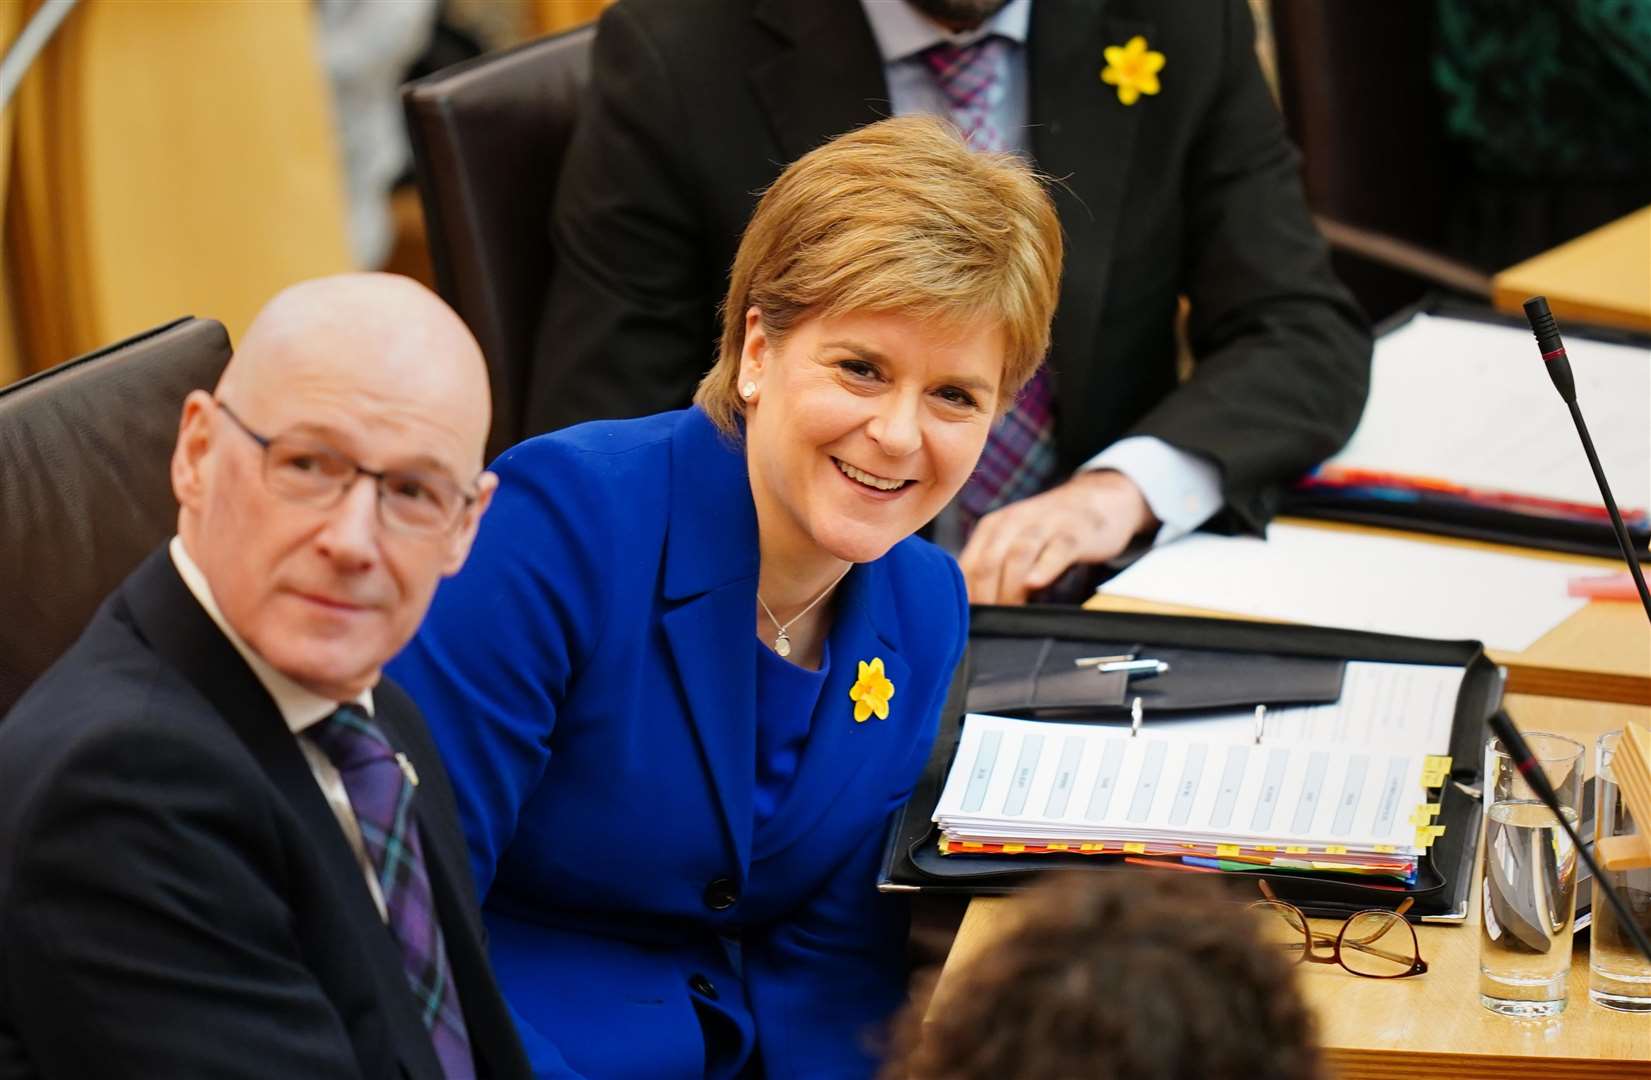 Nicola Sturgeon described John Swinney as ‘the most important person in my adult life’, outside her family and husband (Jane Barlow/PA)